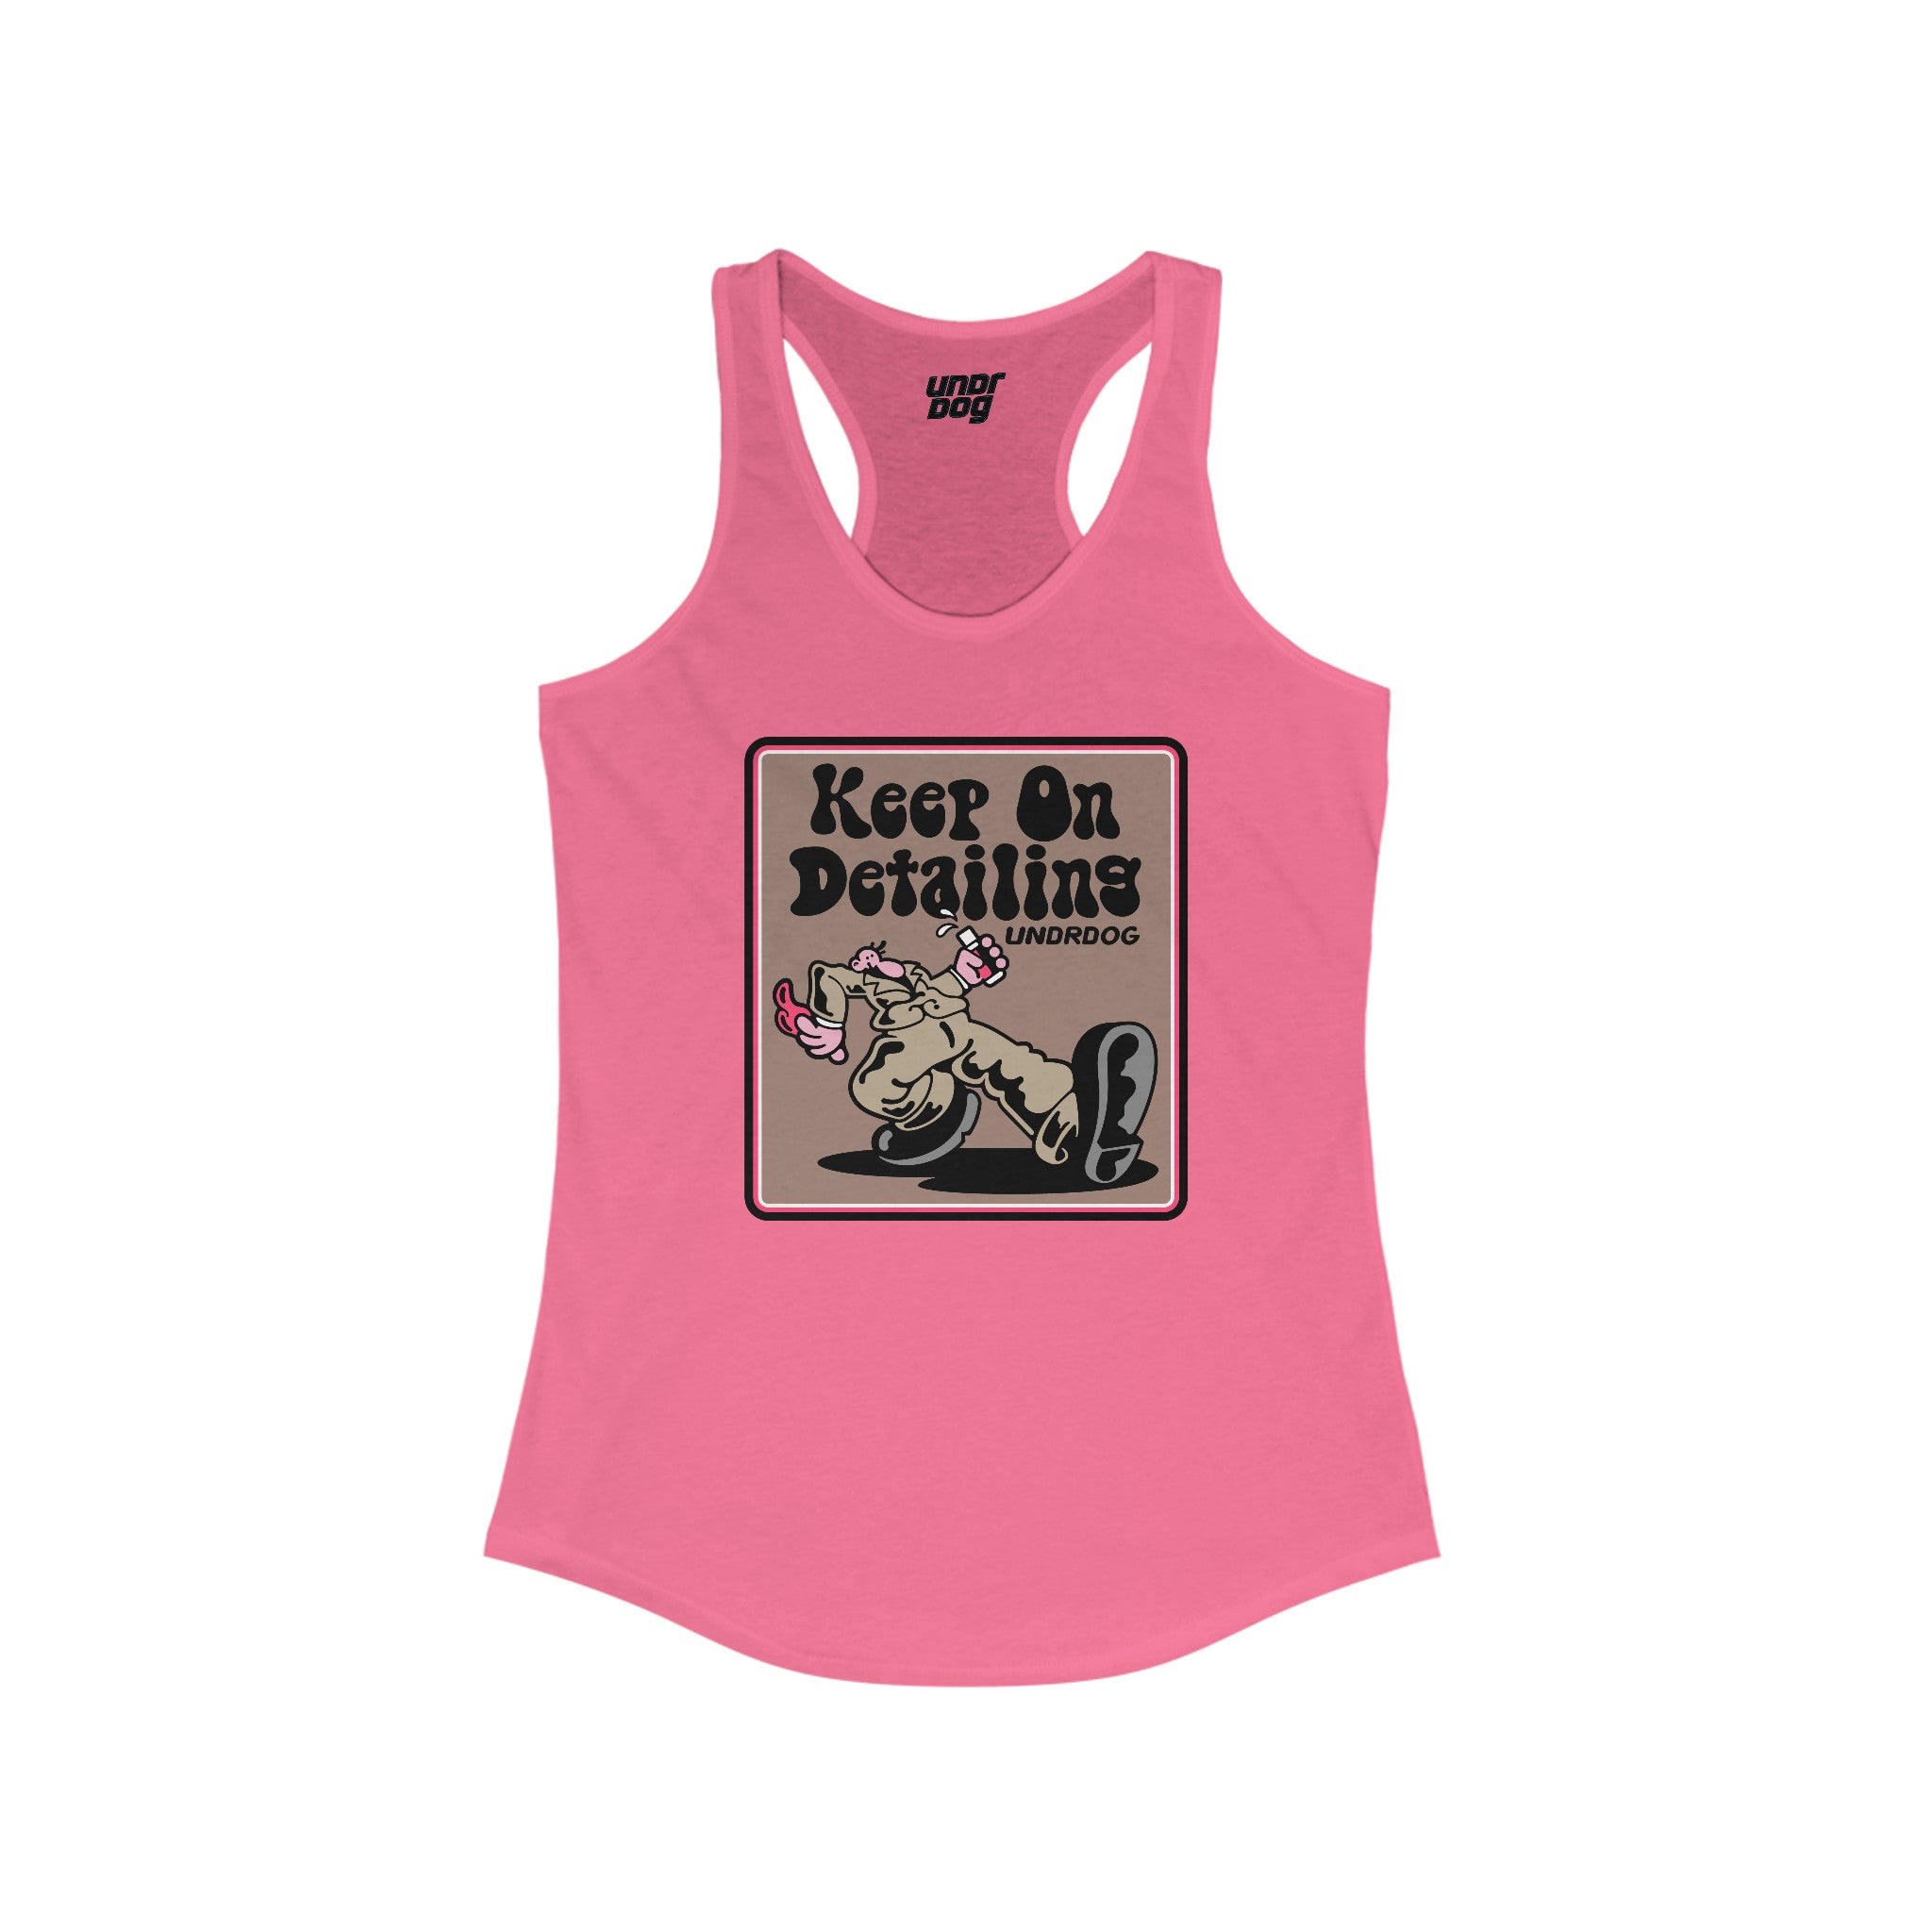 7942817552601562430_2048.jpg - Keep on Detailing v2 Women's Tank - Undrdog Surface Products